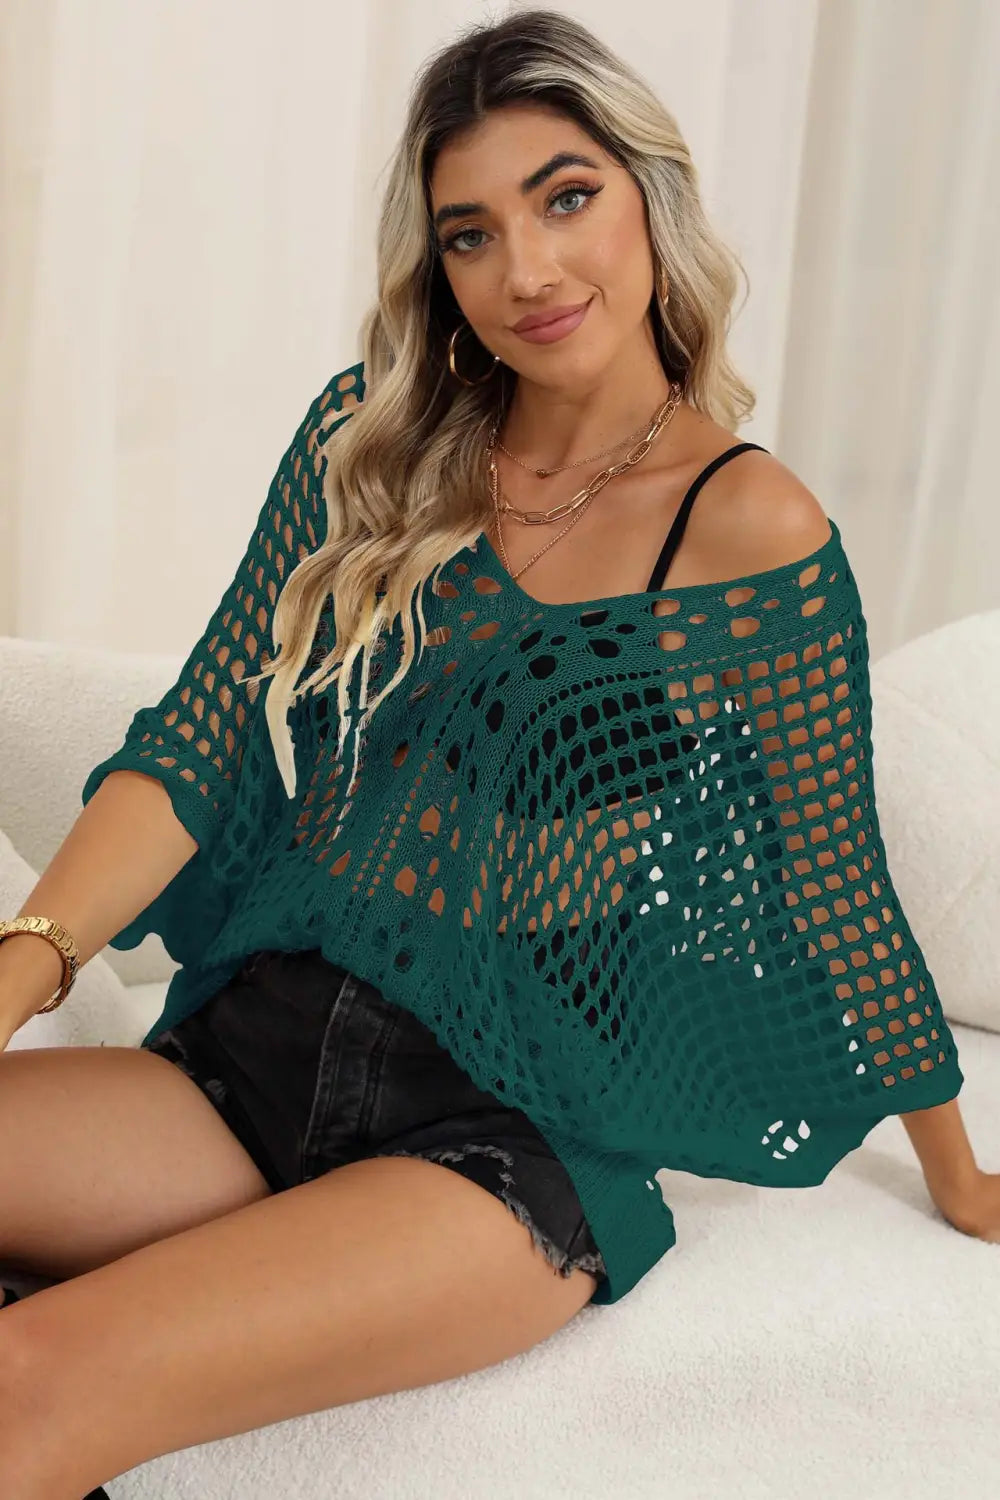 Boho Lace Cover-up Blouse – Effortless Summer Chic